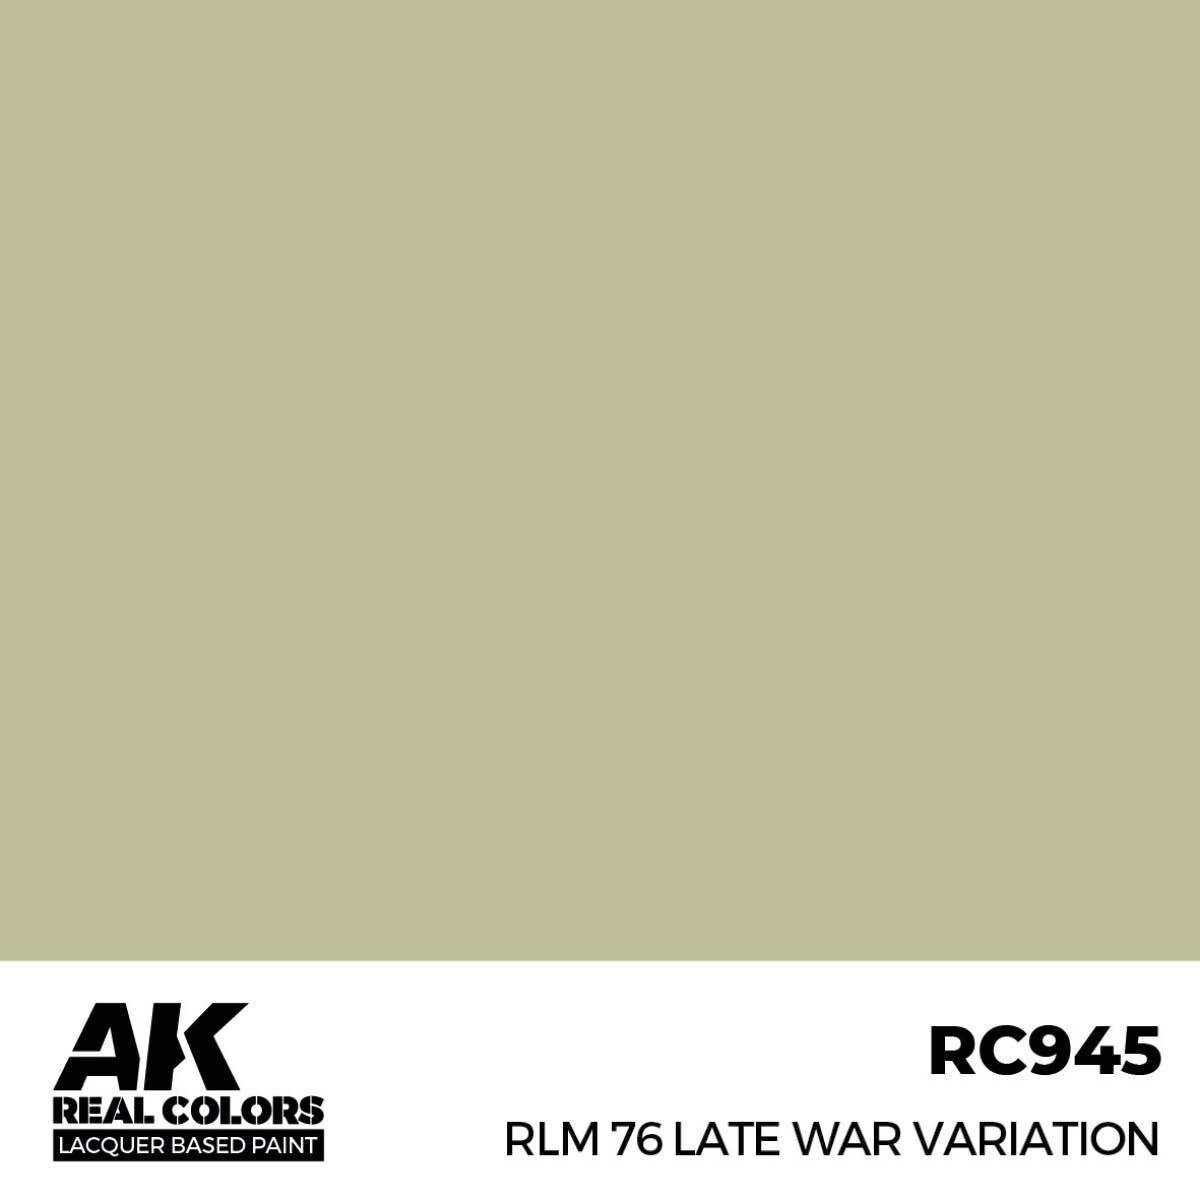 AK RC945 Real Colors RLM 76 Late War Variation 17 ml.